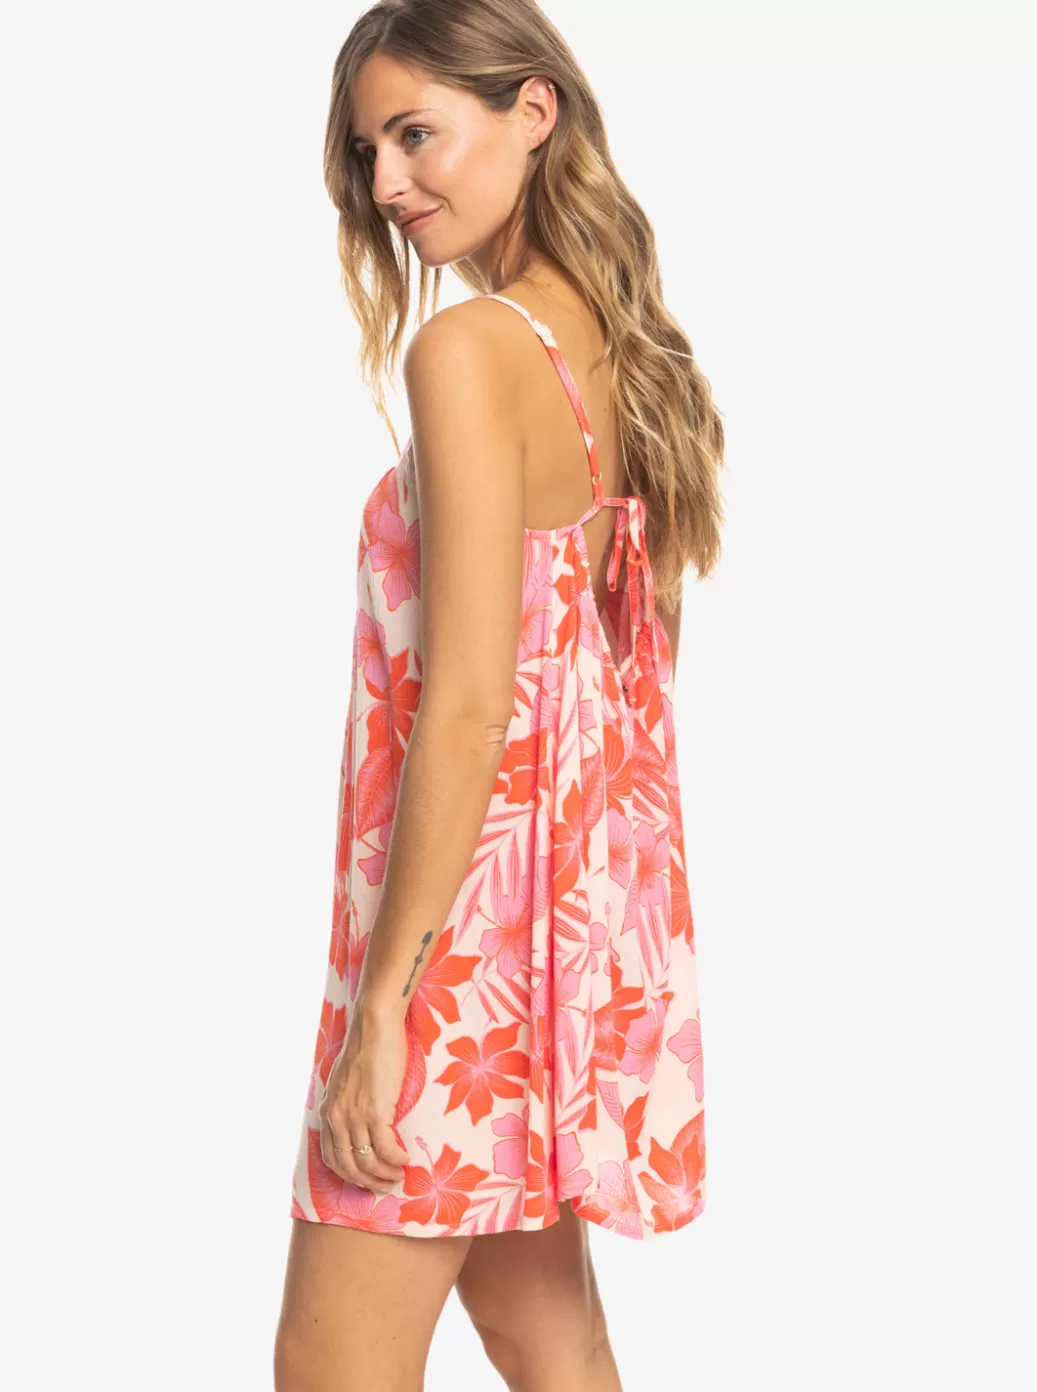 Cover Ups | WOMEN ROXY Summer Adventures Beach Cover-Up Dress Pale Dogwood Lhibiscus